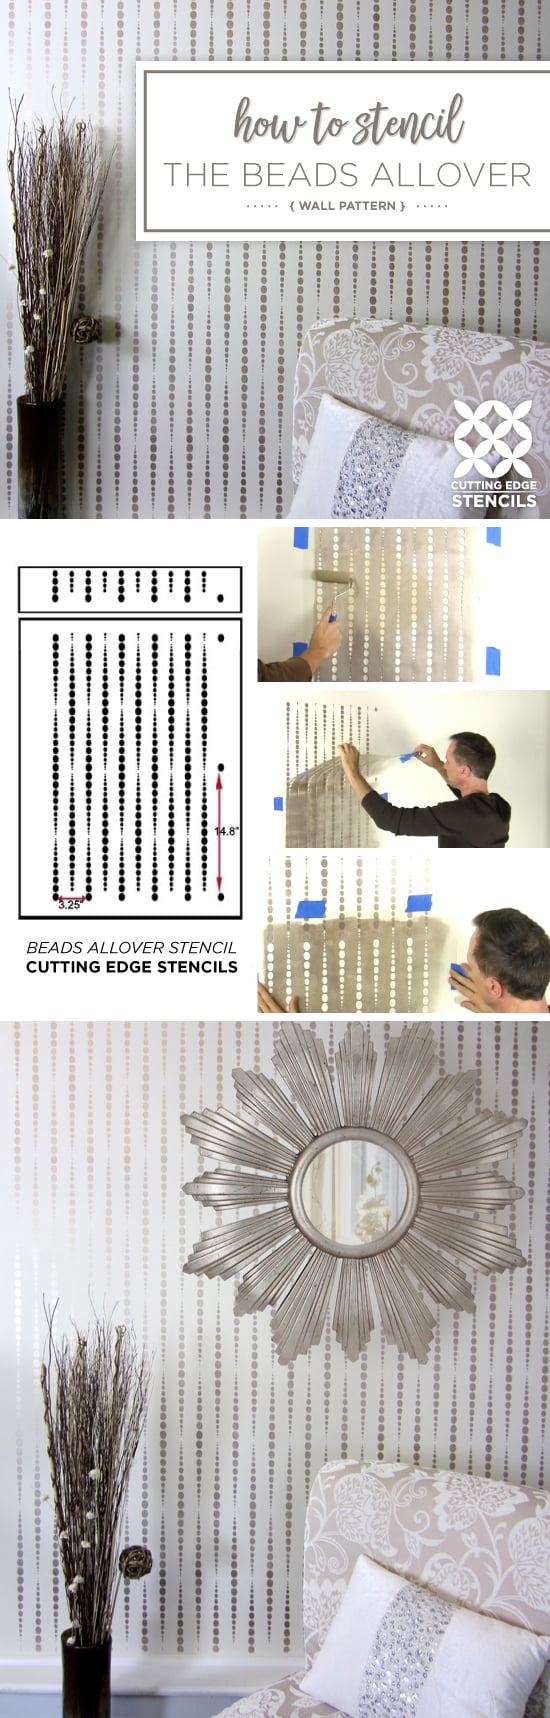 Cutting Edge Stencils shares a stencil tutorial showing how to paint an accent wall using a geometric wallpaper pattern, the Beads Allover Stencil. http://www.cuttingedgestencils.com/beads-wall-stencil-pattern.html